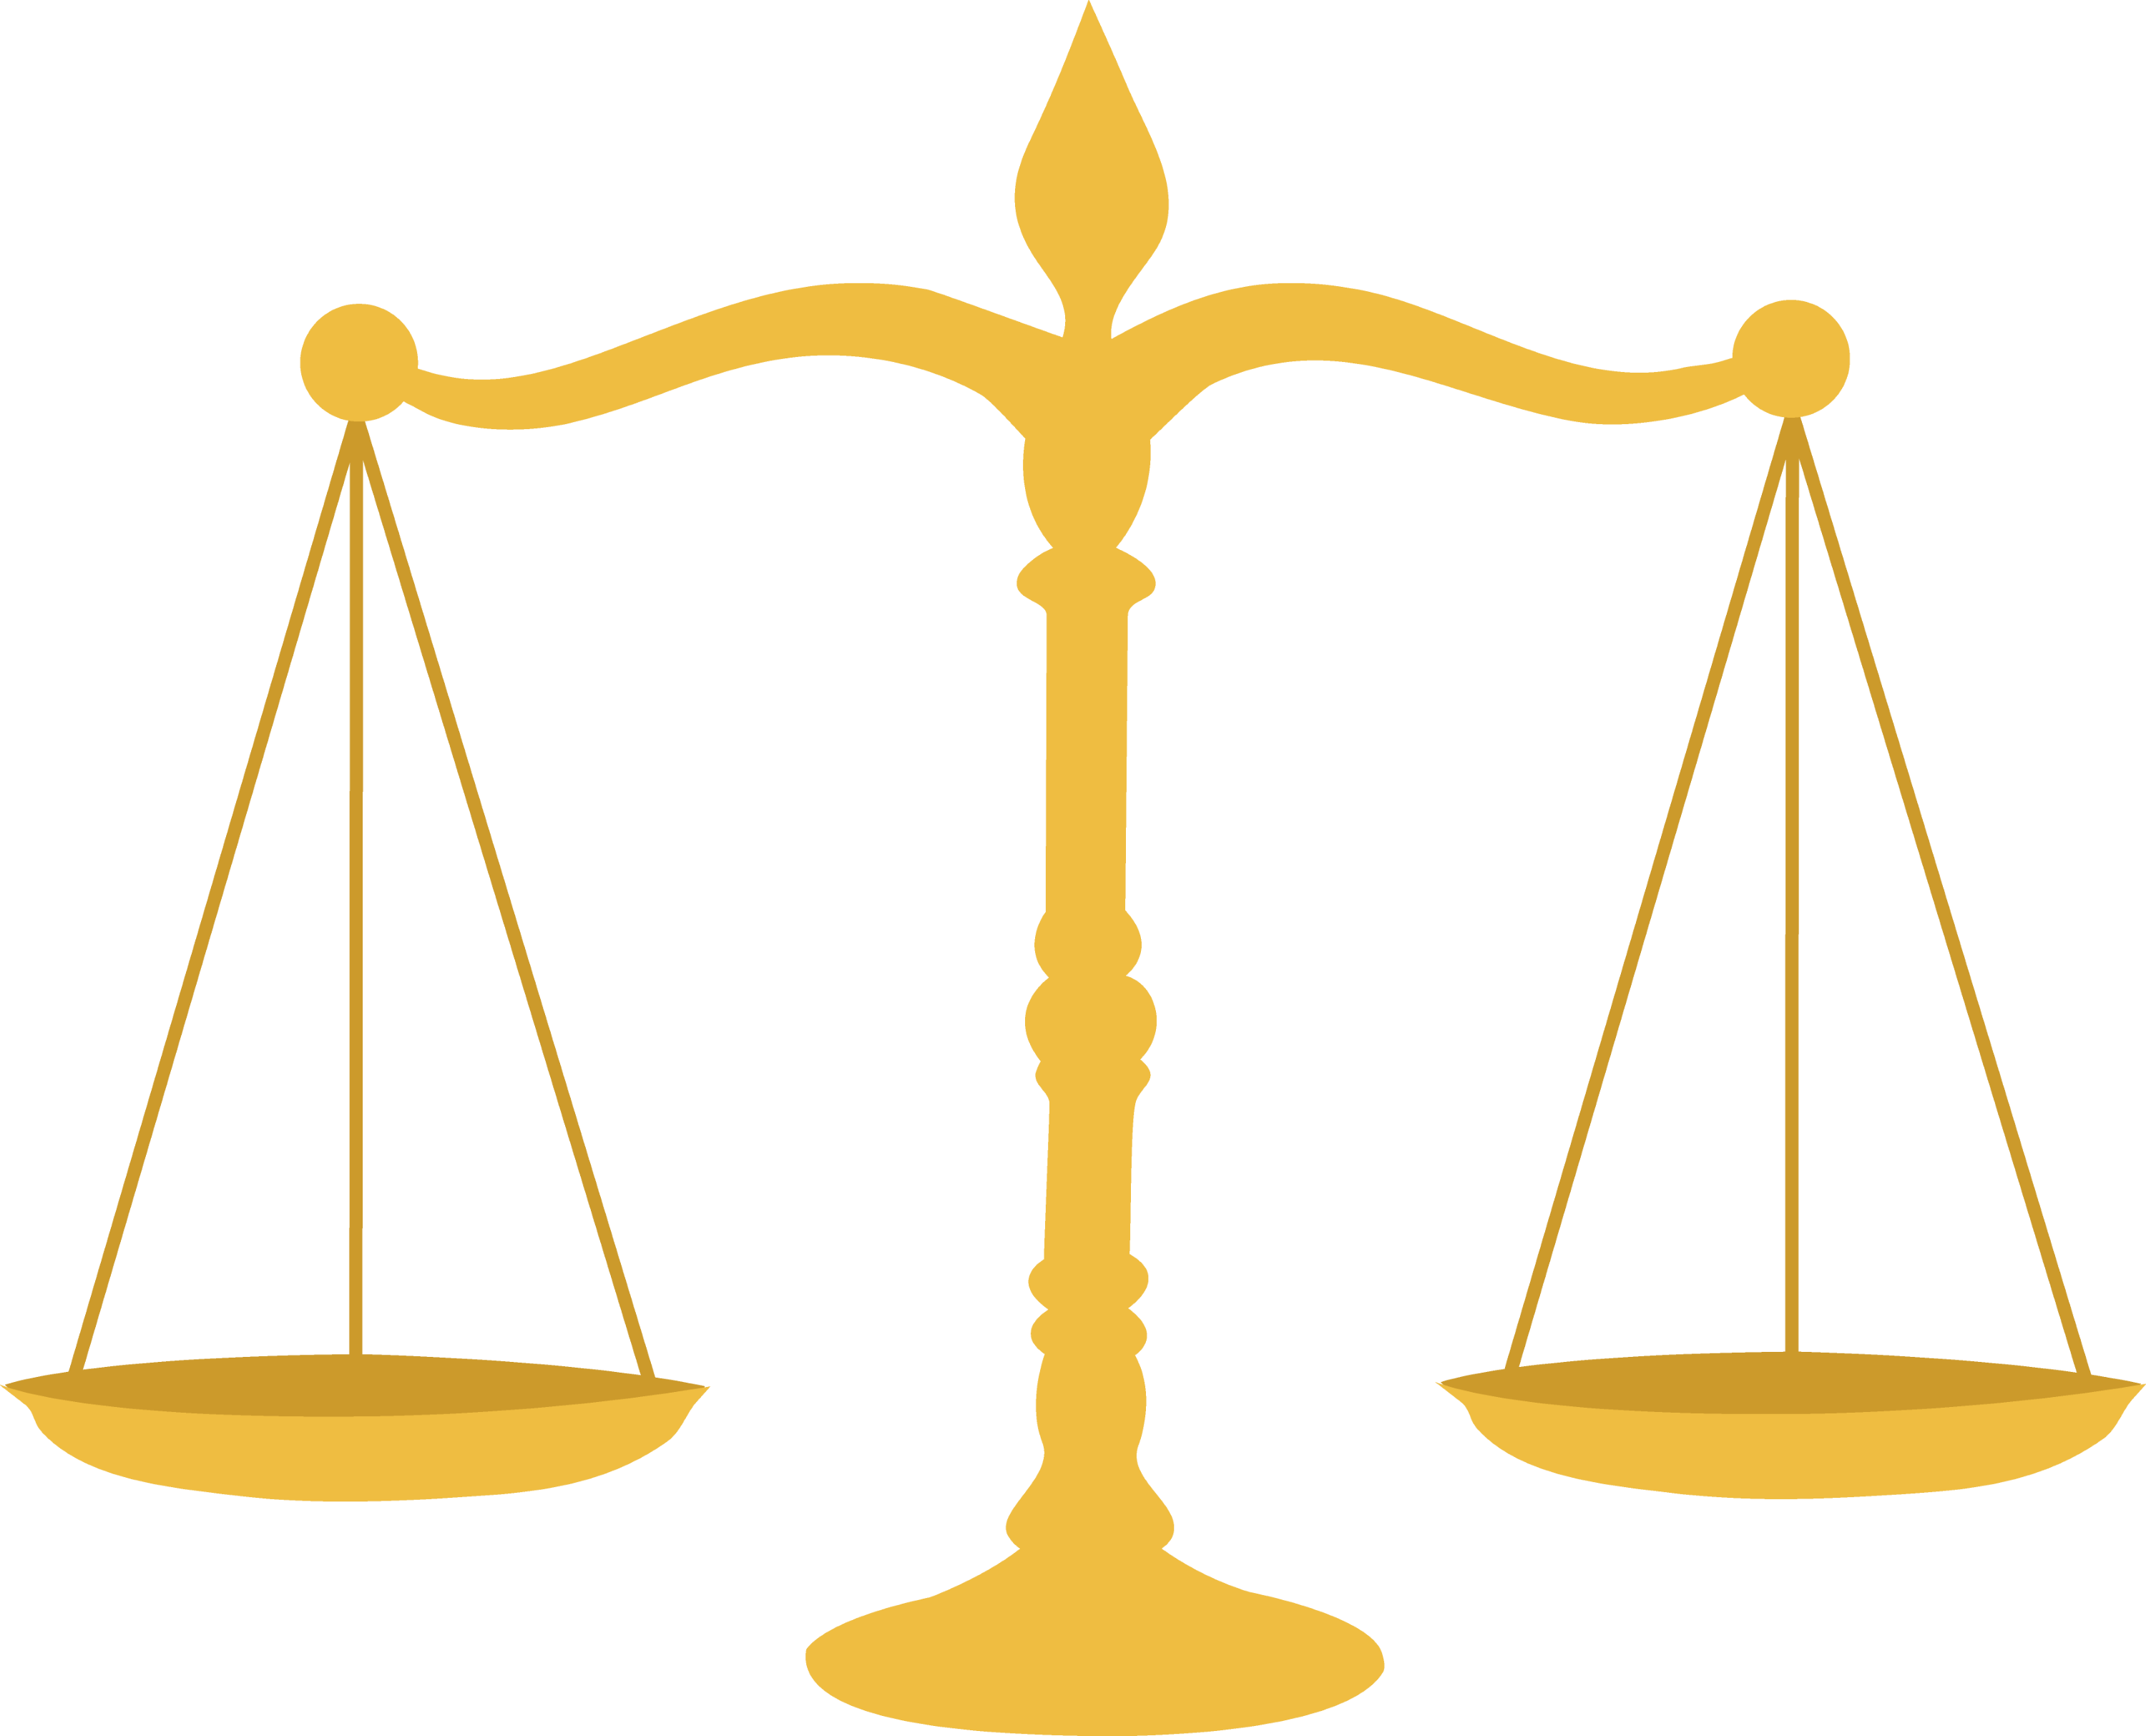 free clipart images scales of justice - photo #10